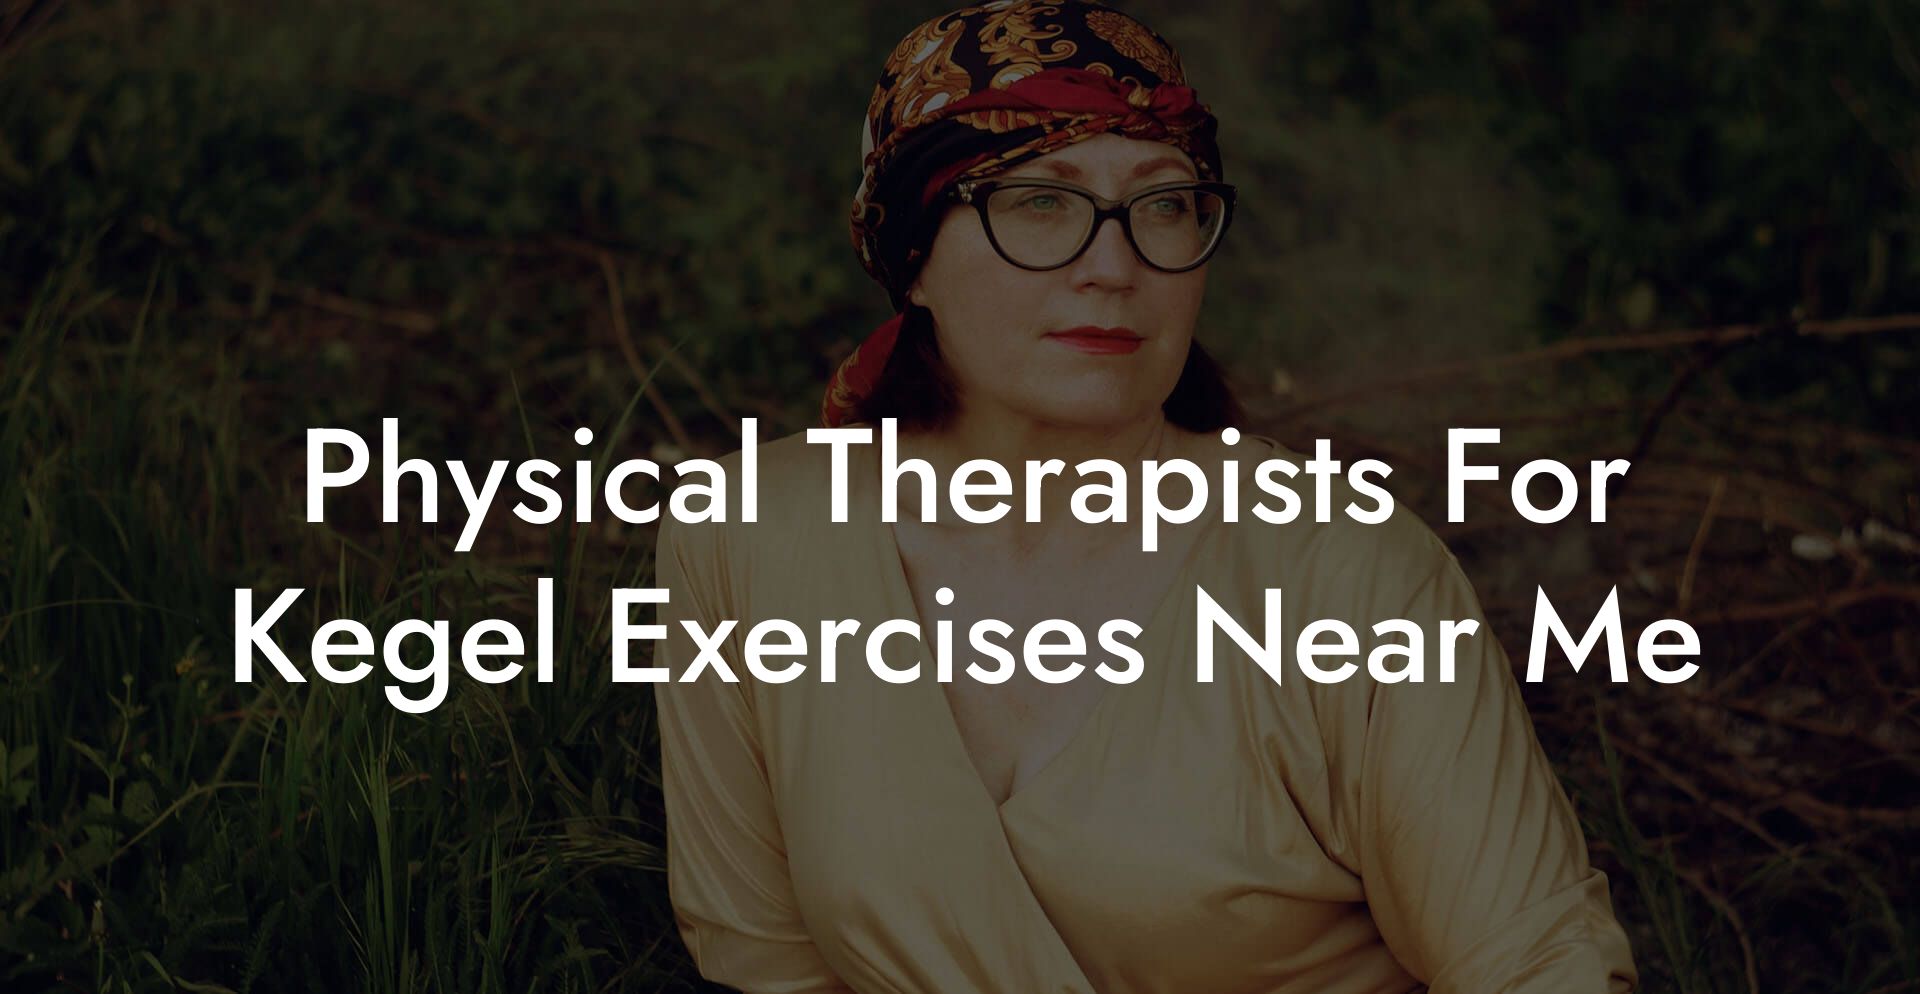 Physical Therapists For Kegel Exercises Near Me